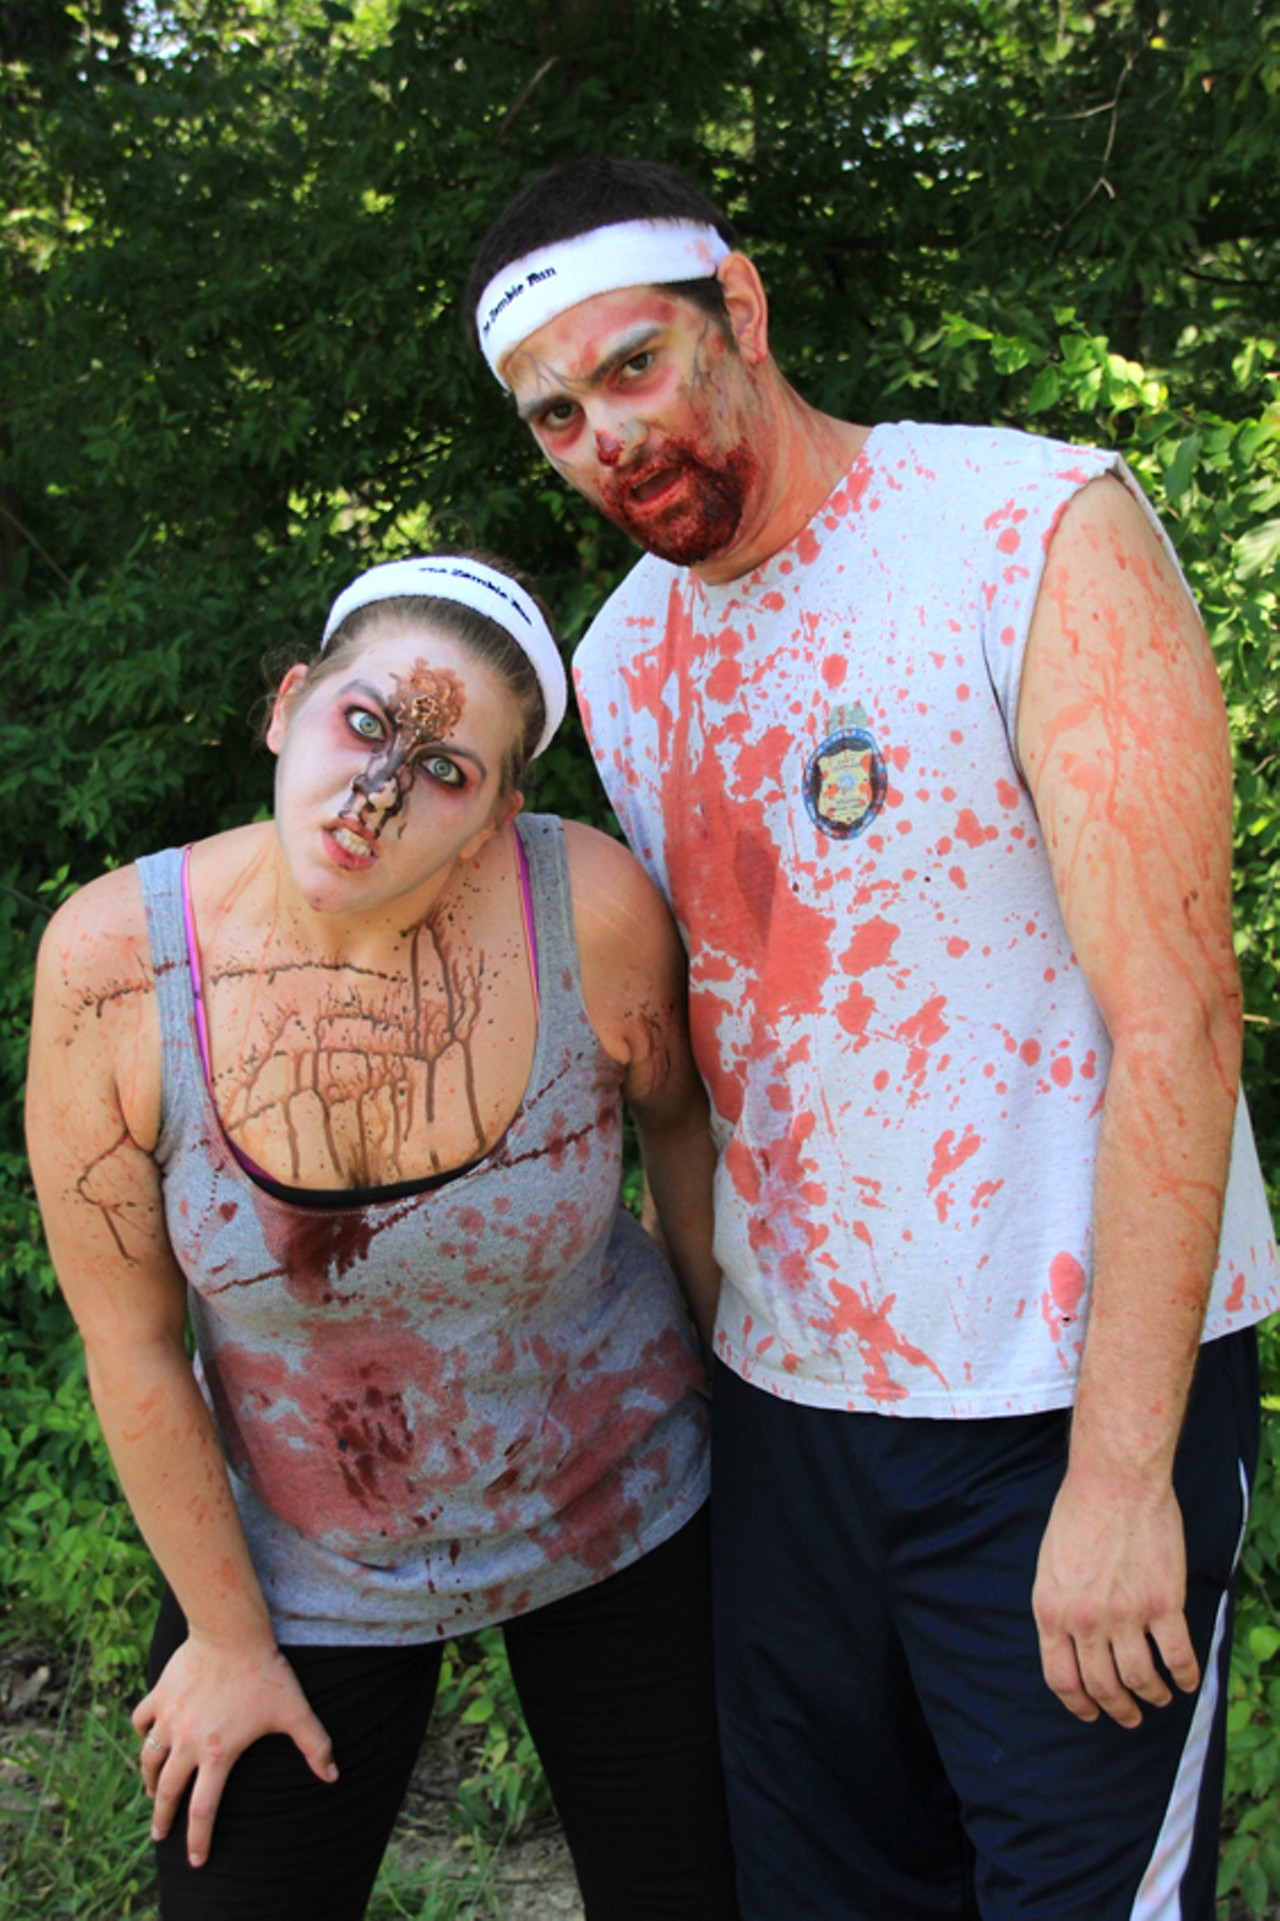 More Photos From The St. Louis Zombie Run